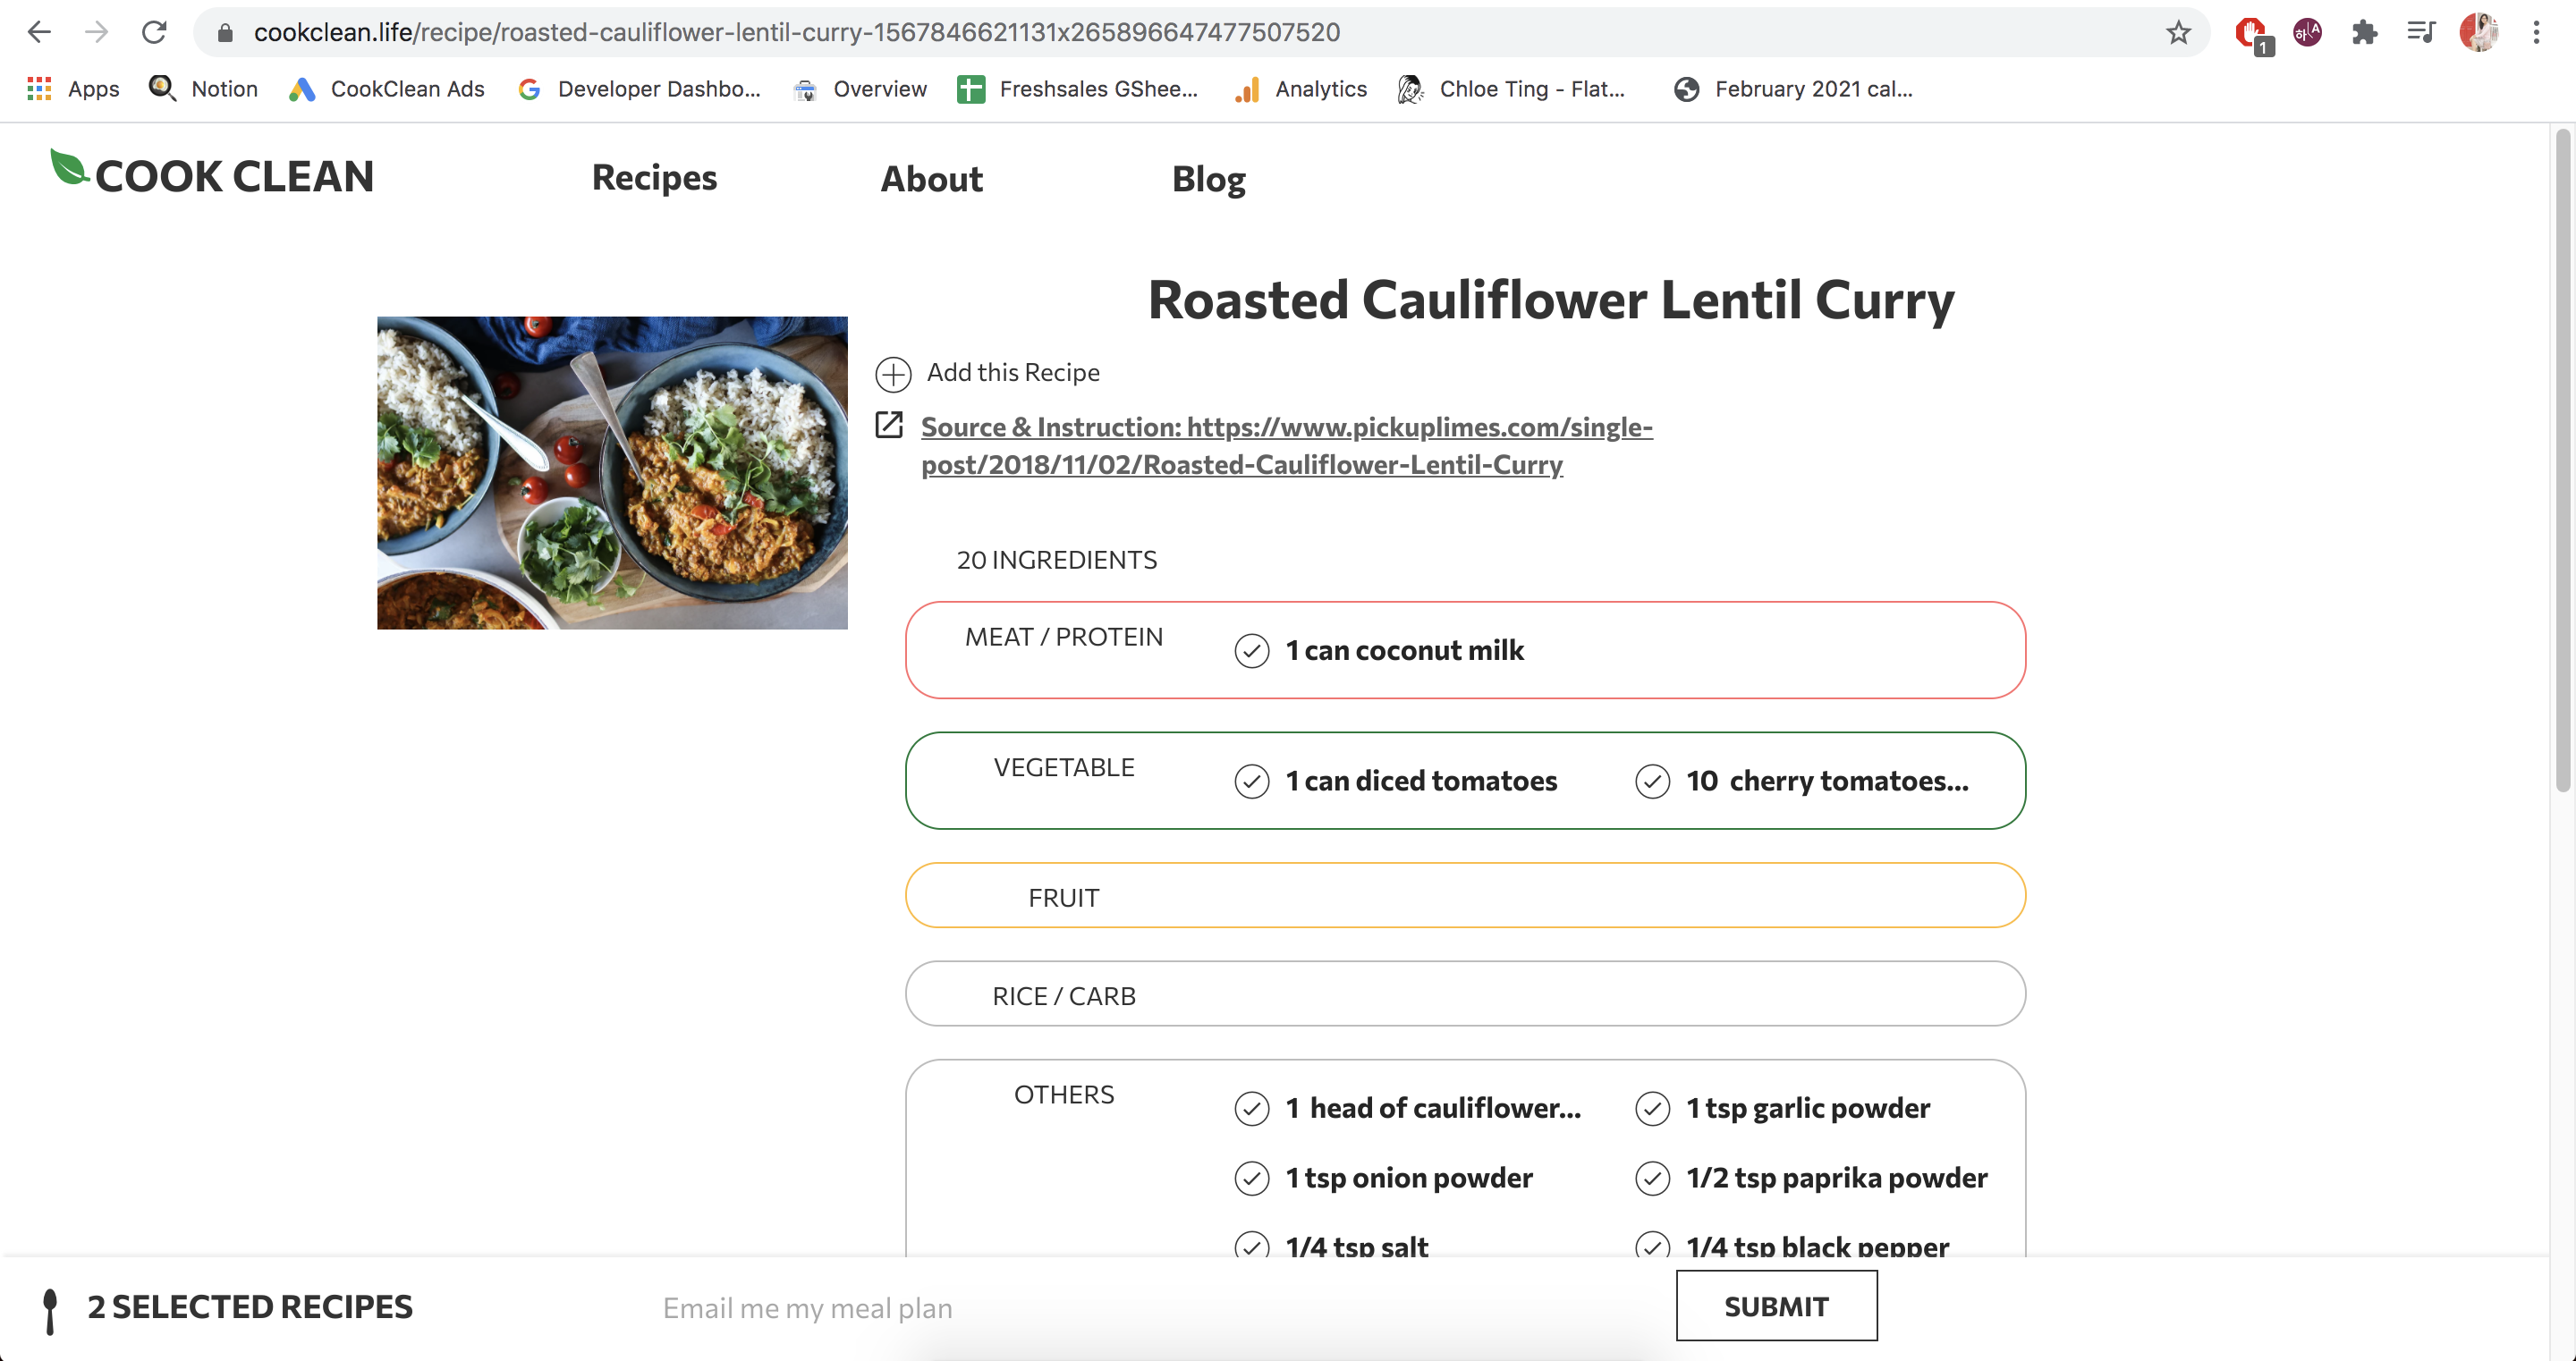 Individual recipe page: Show detailed ingredients of a recipe